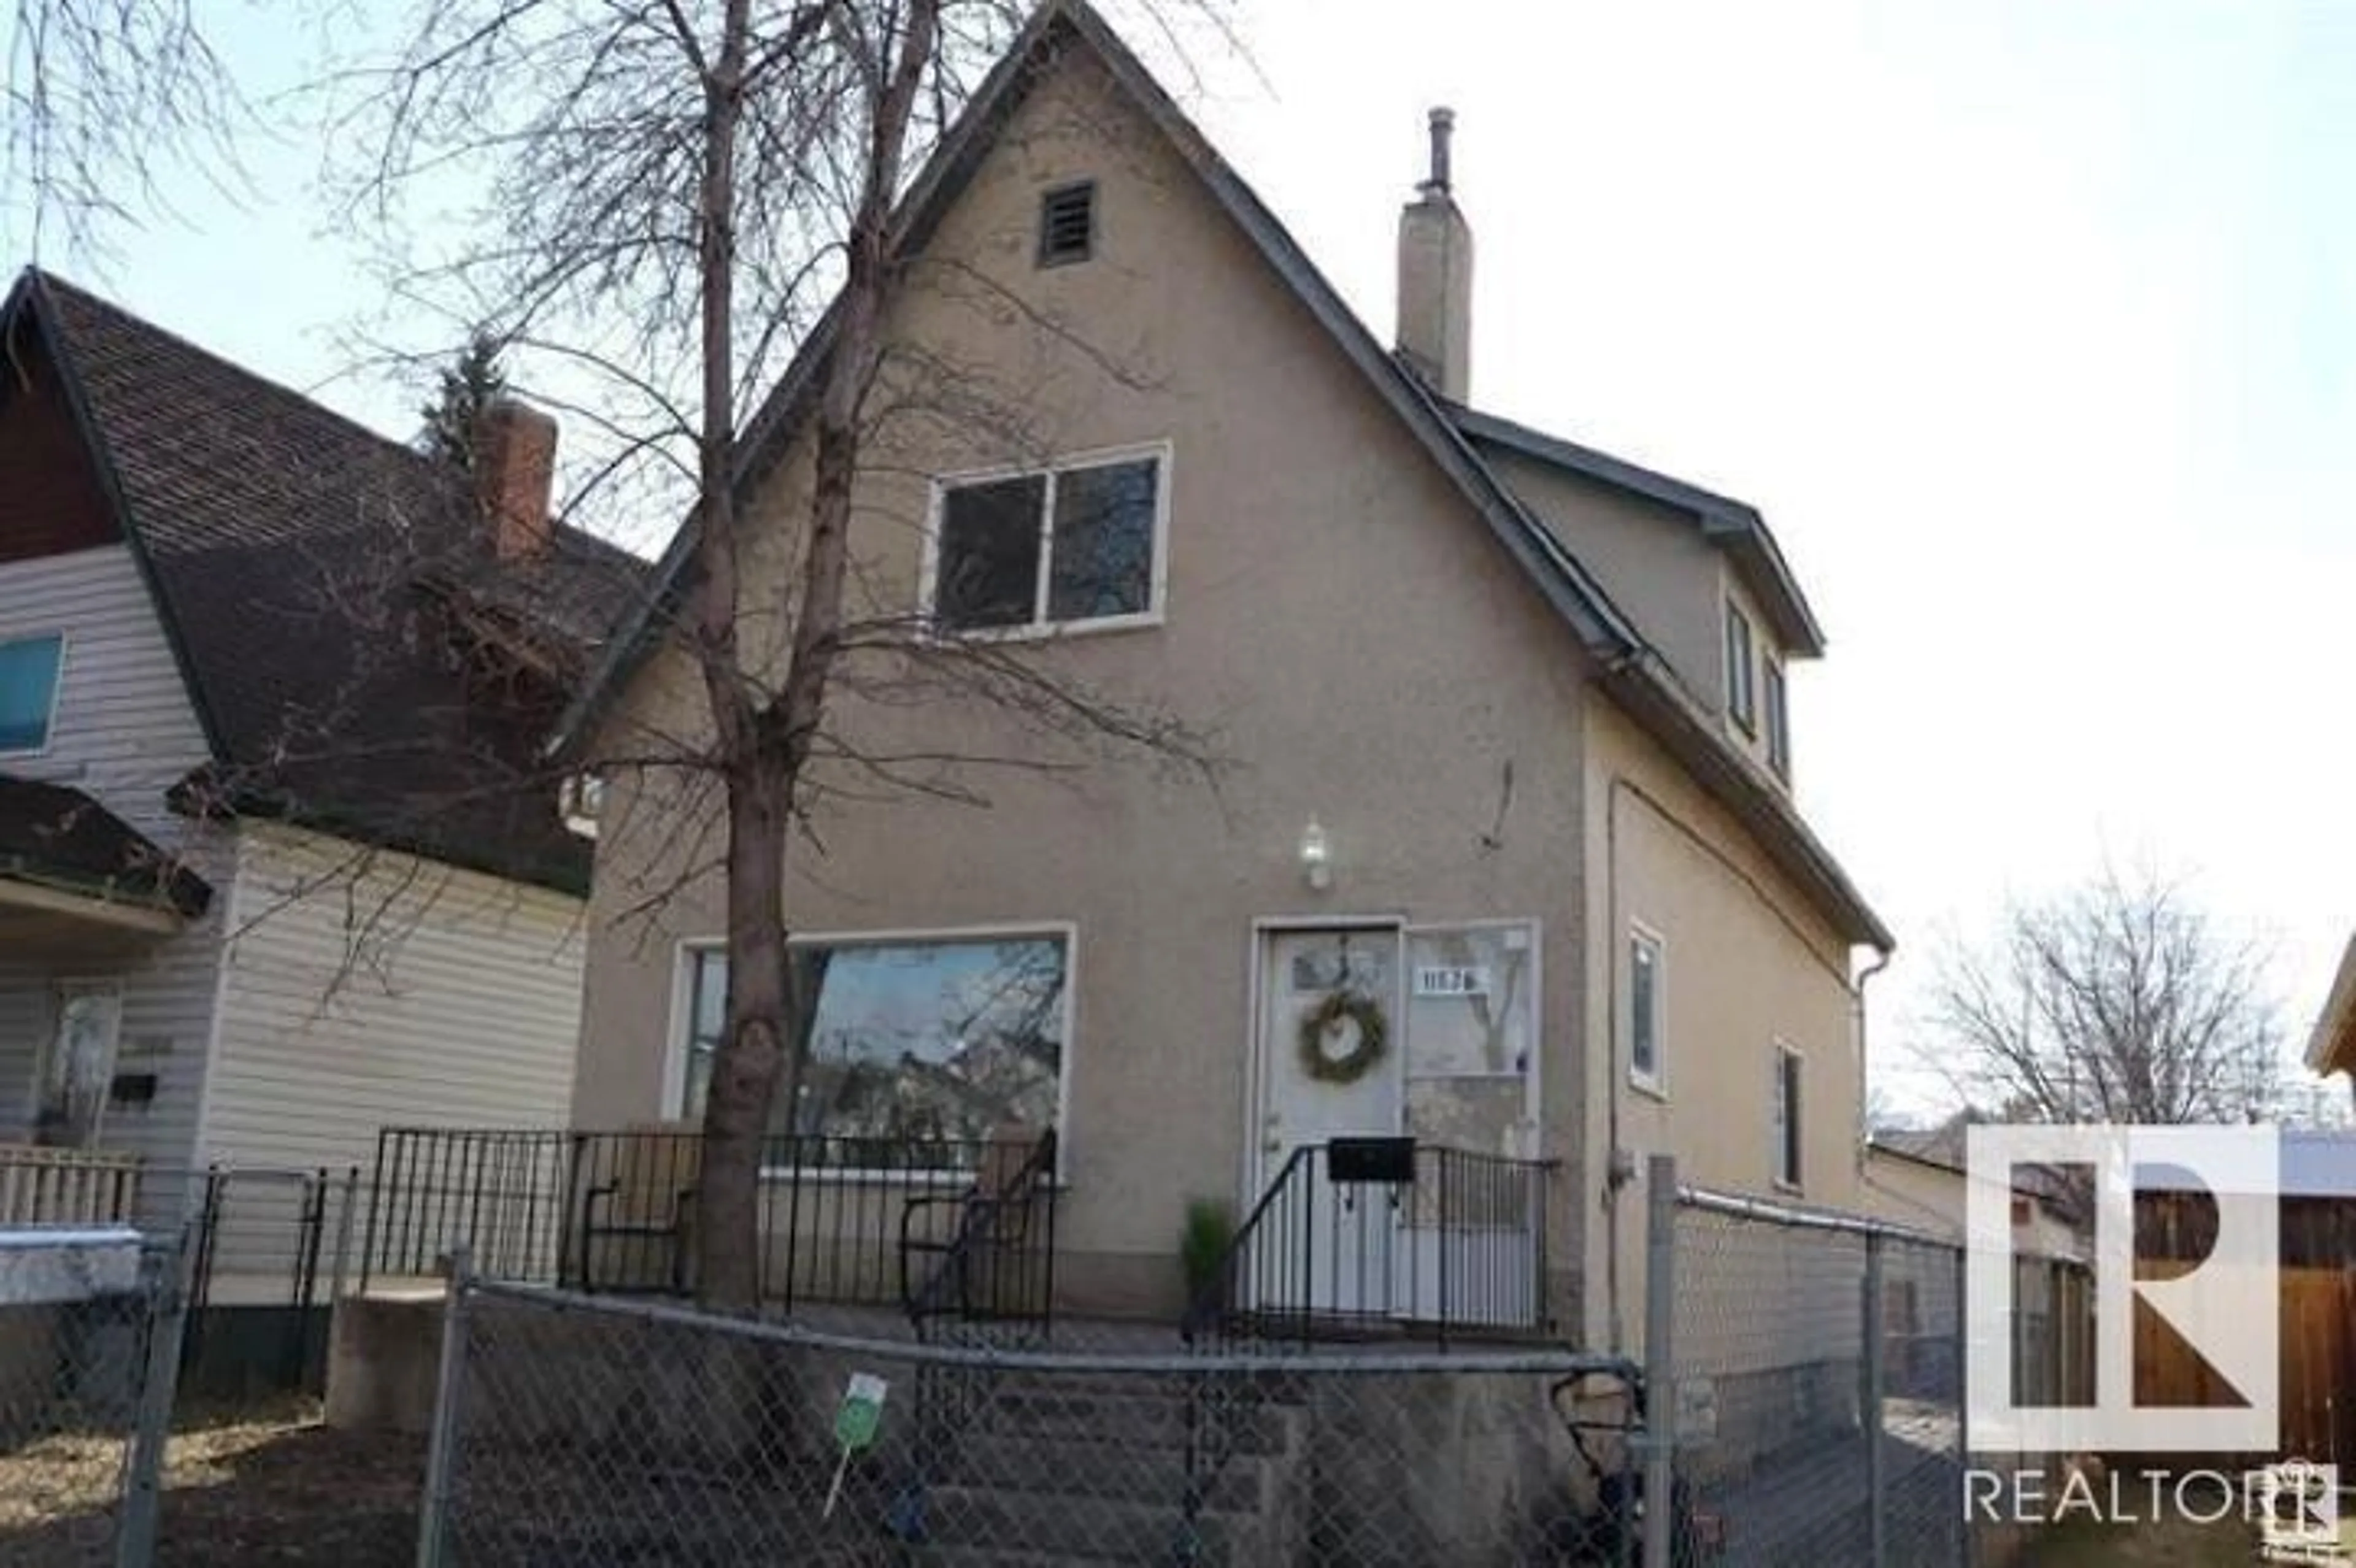 Outside view for 11826 79 ST NW, Edmonton Alberta T5B2L1